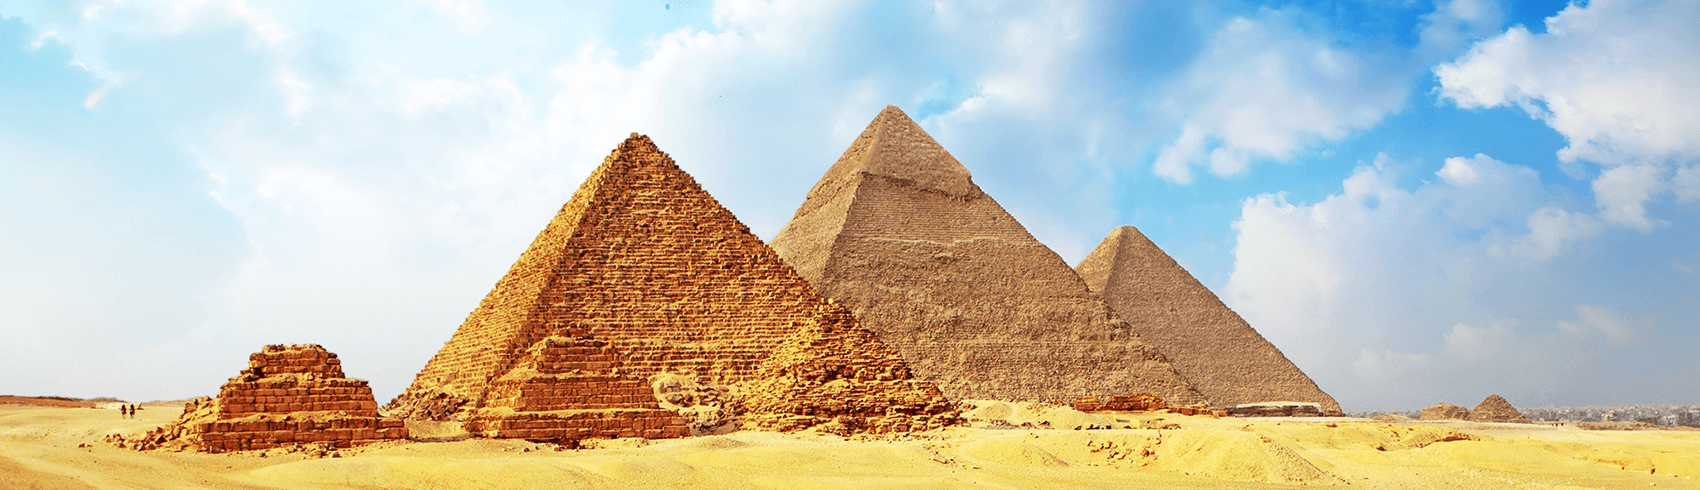 Tour packages to Egypt